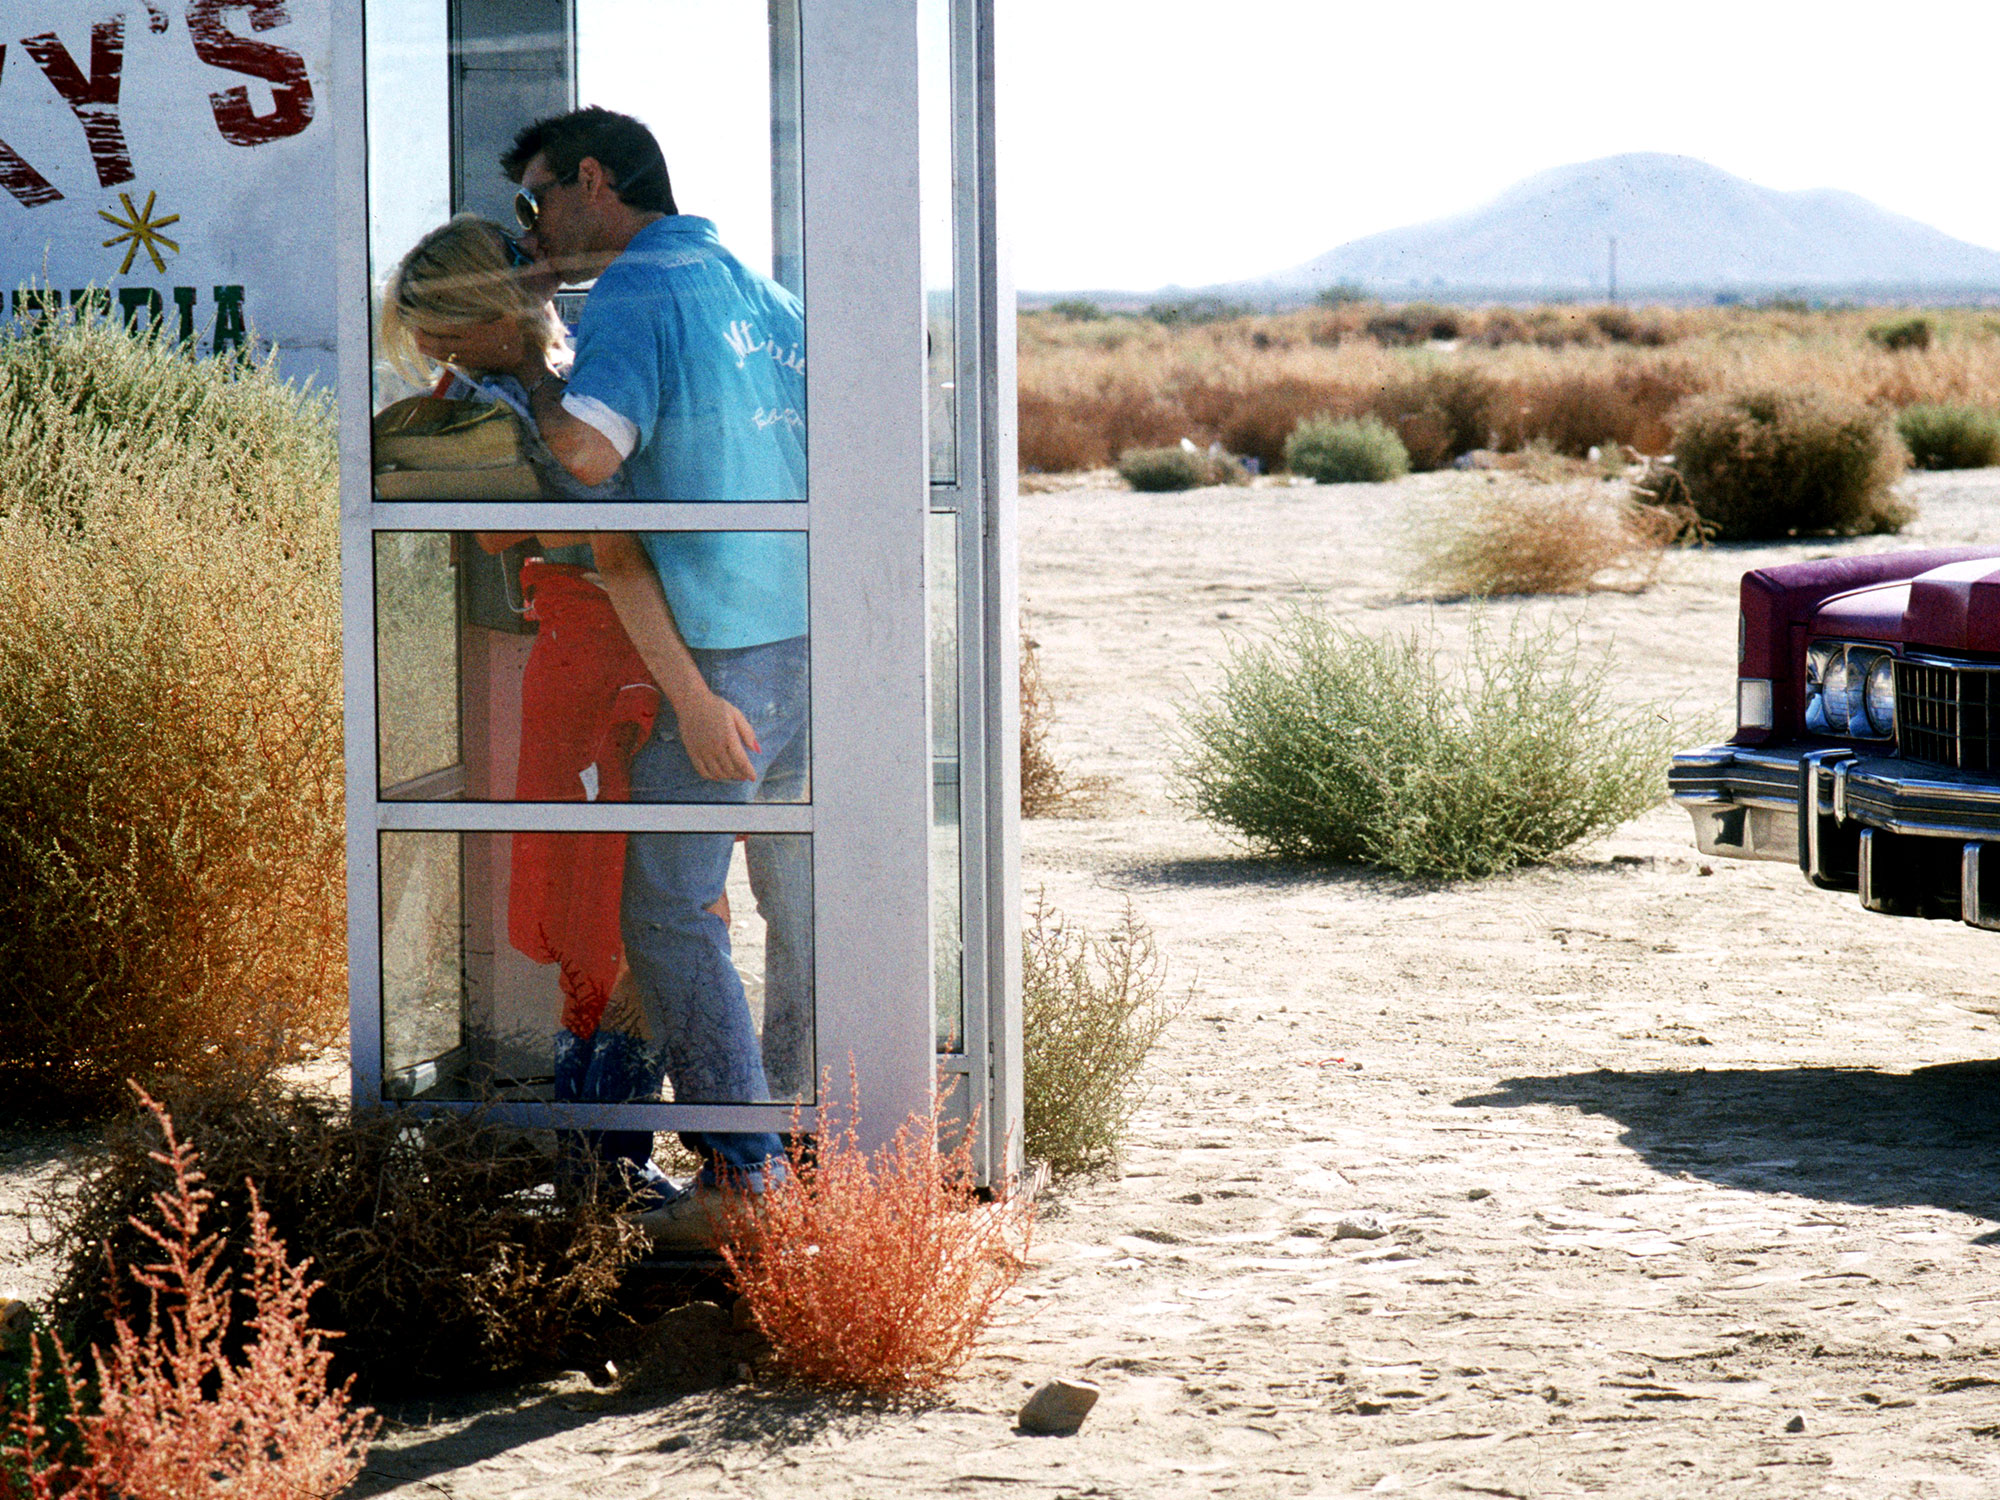 Is True Romance the ultimate male movie fantasy? image pic